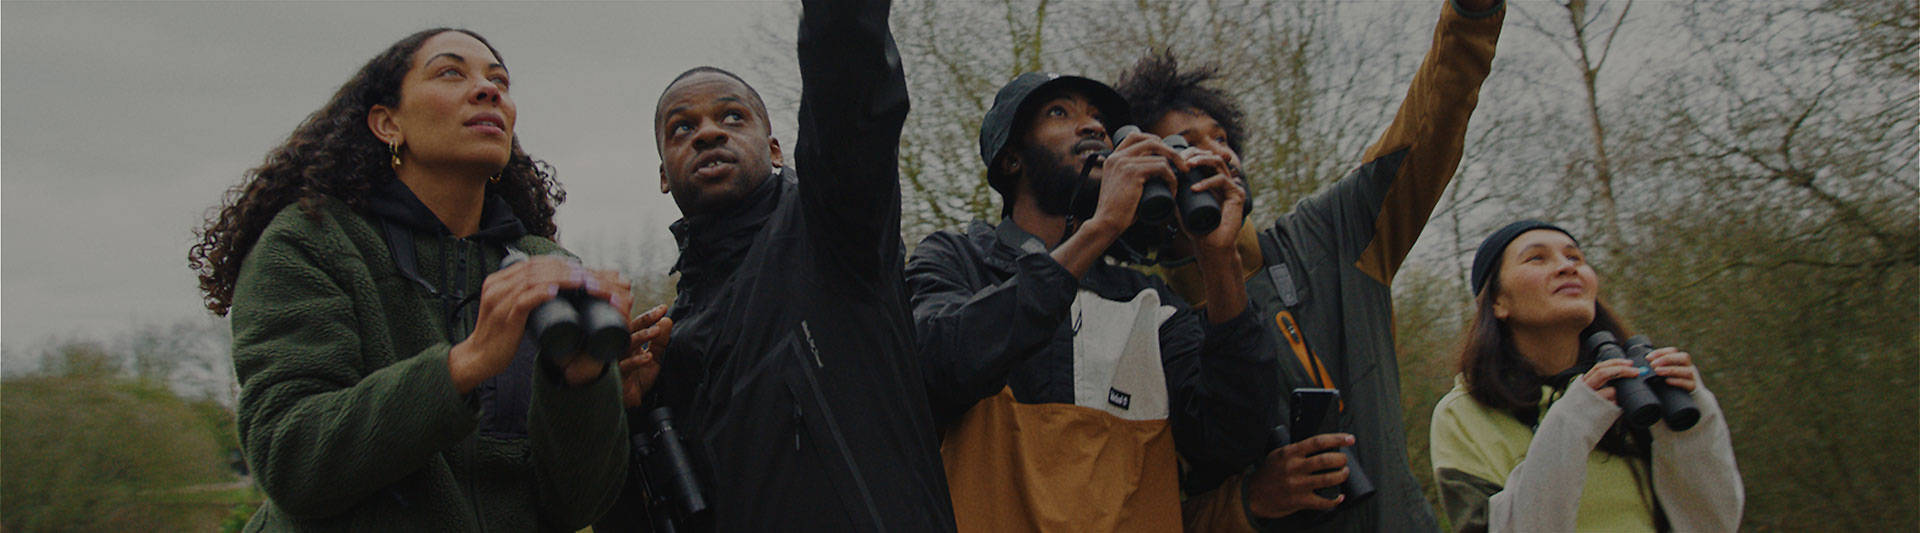 Image of five friends from the waist up, wearing Timberland gear on a cloudy day, standing out in a field with trees behind them, all holding binoculars and pointing up into the sky at something out of frame.